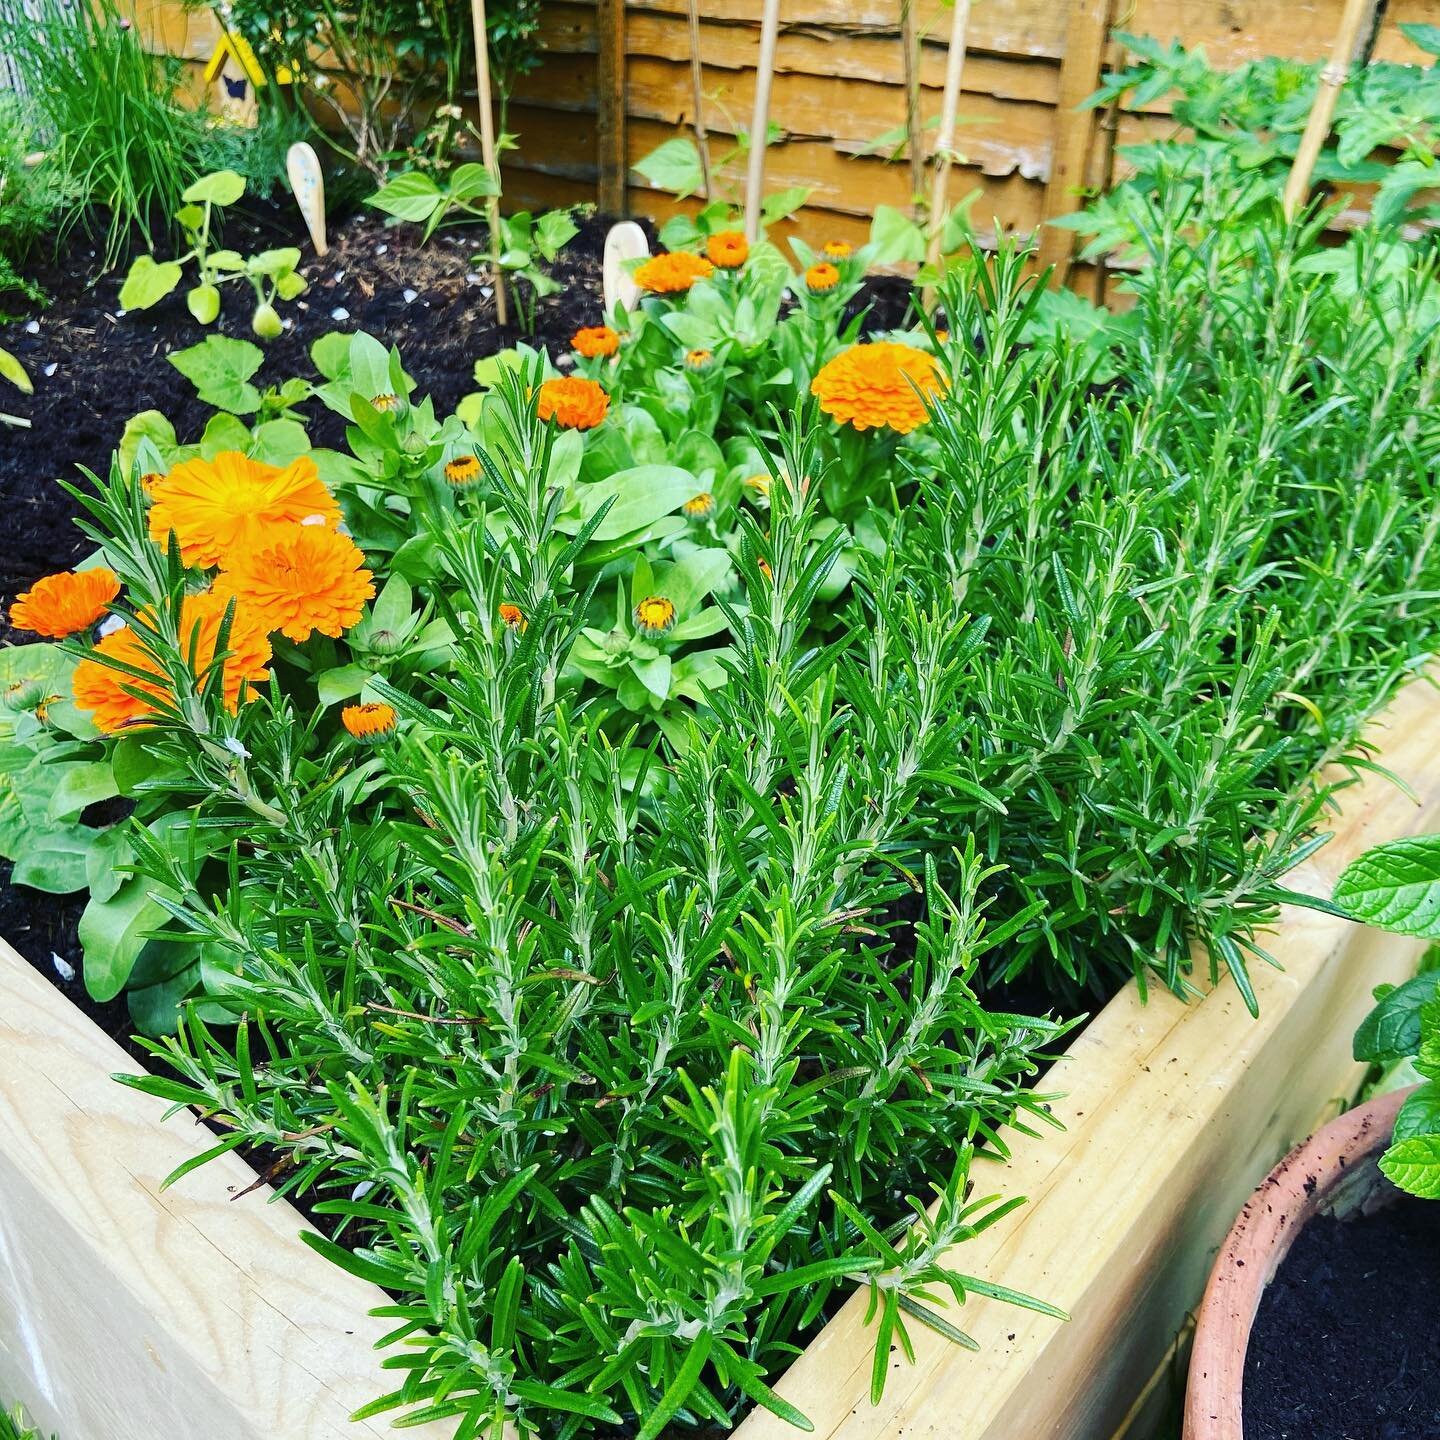 Our medicinal garden is flourishing here at The Cosy Cunning Folk! With calendula, sage, thyme, rosemary, lemon balm &amp; lavender all blooming more each day. 

We try to home grow as much as we can for our business, luckily Kent has abundant lands 